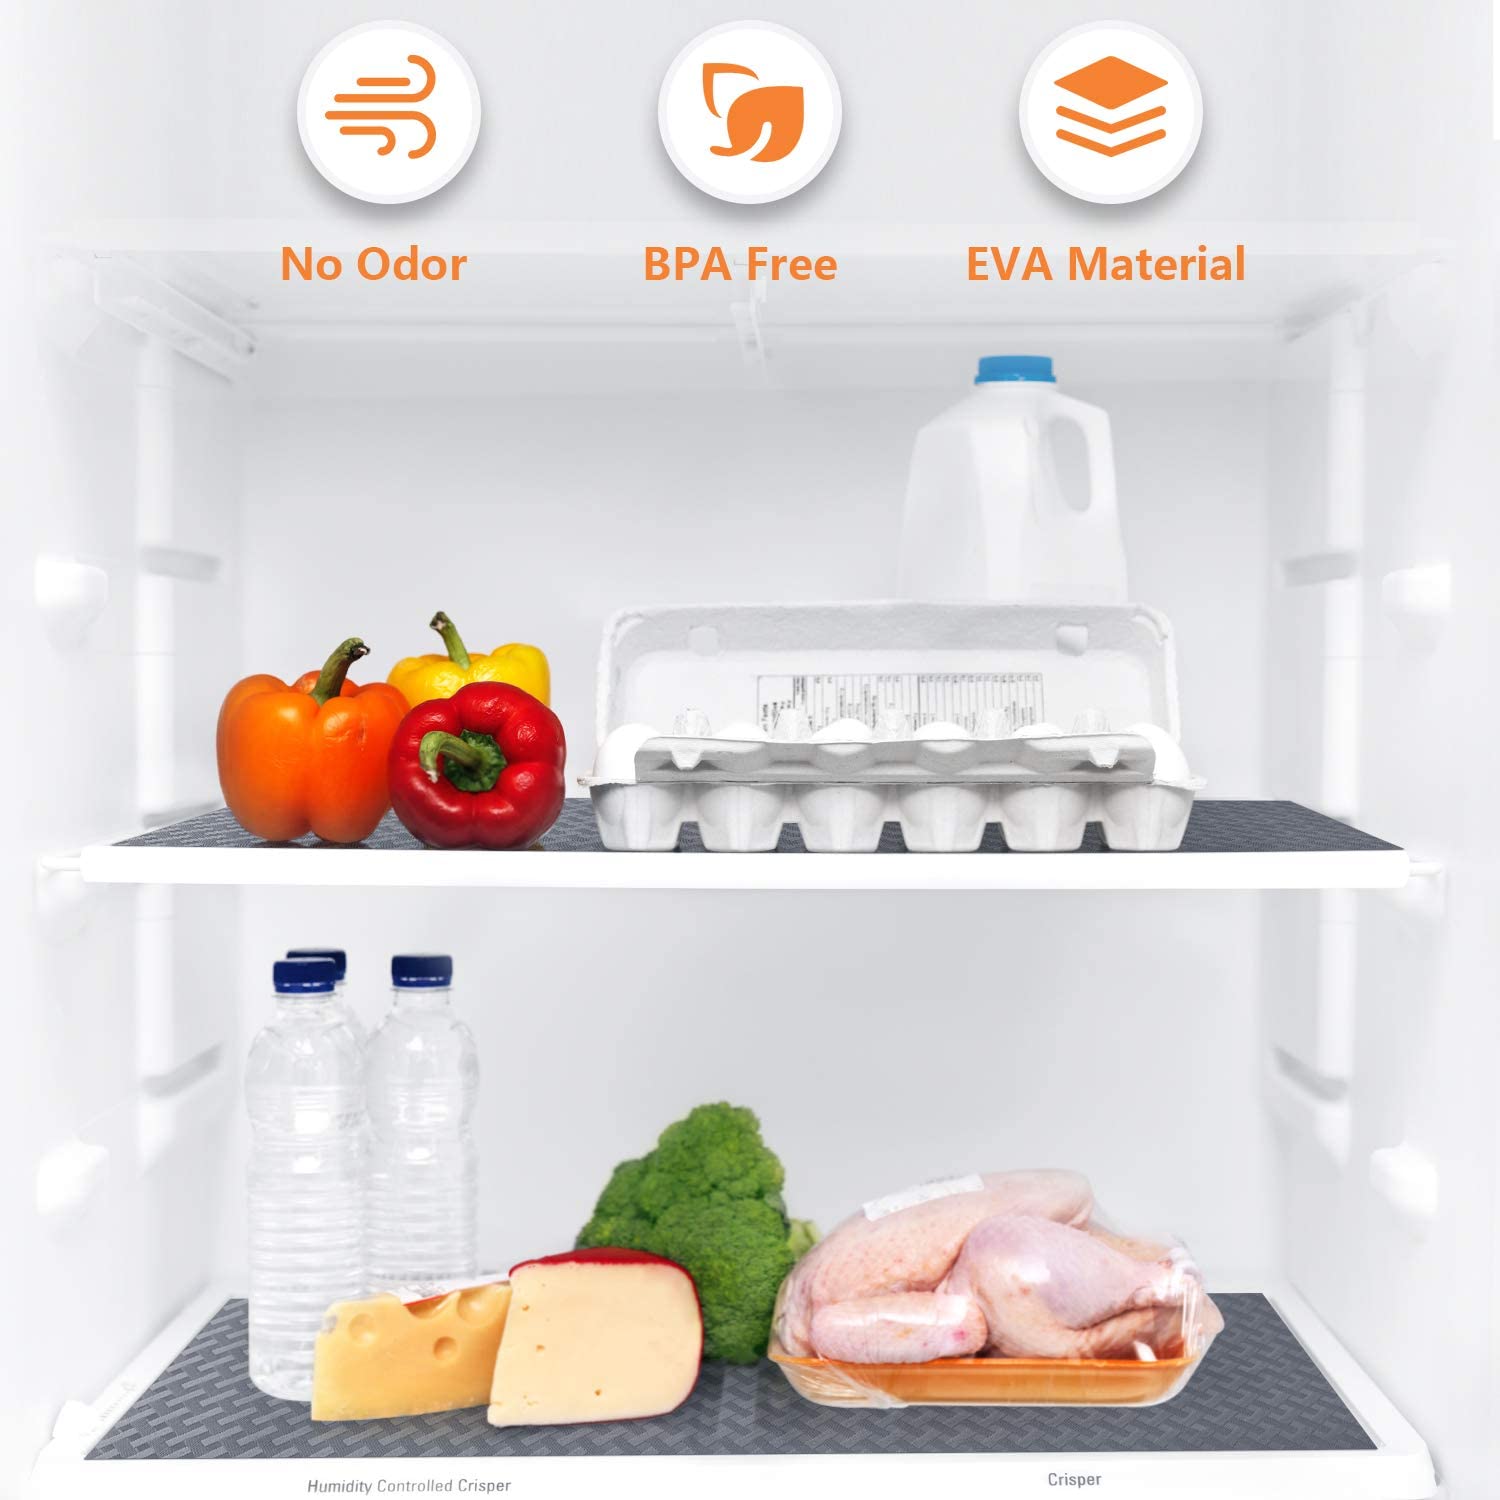 Non-Slip EVA Kitchen Shelf Liners for Cabinets, Refrigerator, Drawers, and Shelves - Waterproof & Oil-Proof, Non Adhesive, 11.8 x 59 Inches - Gray 7